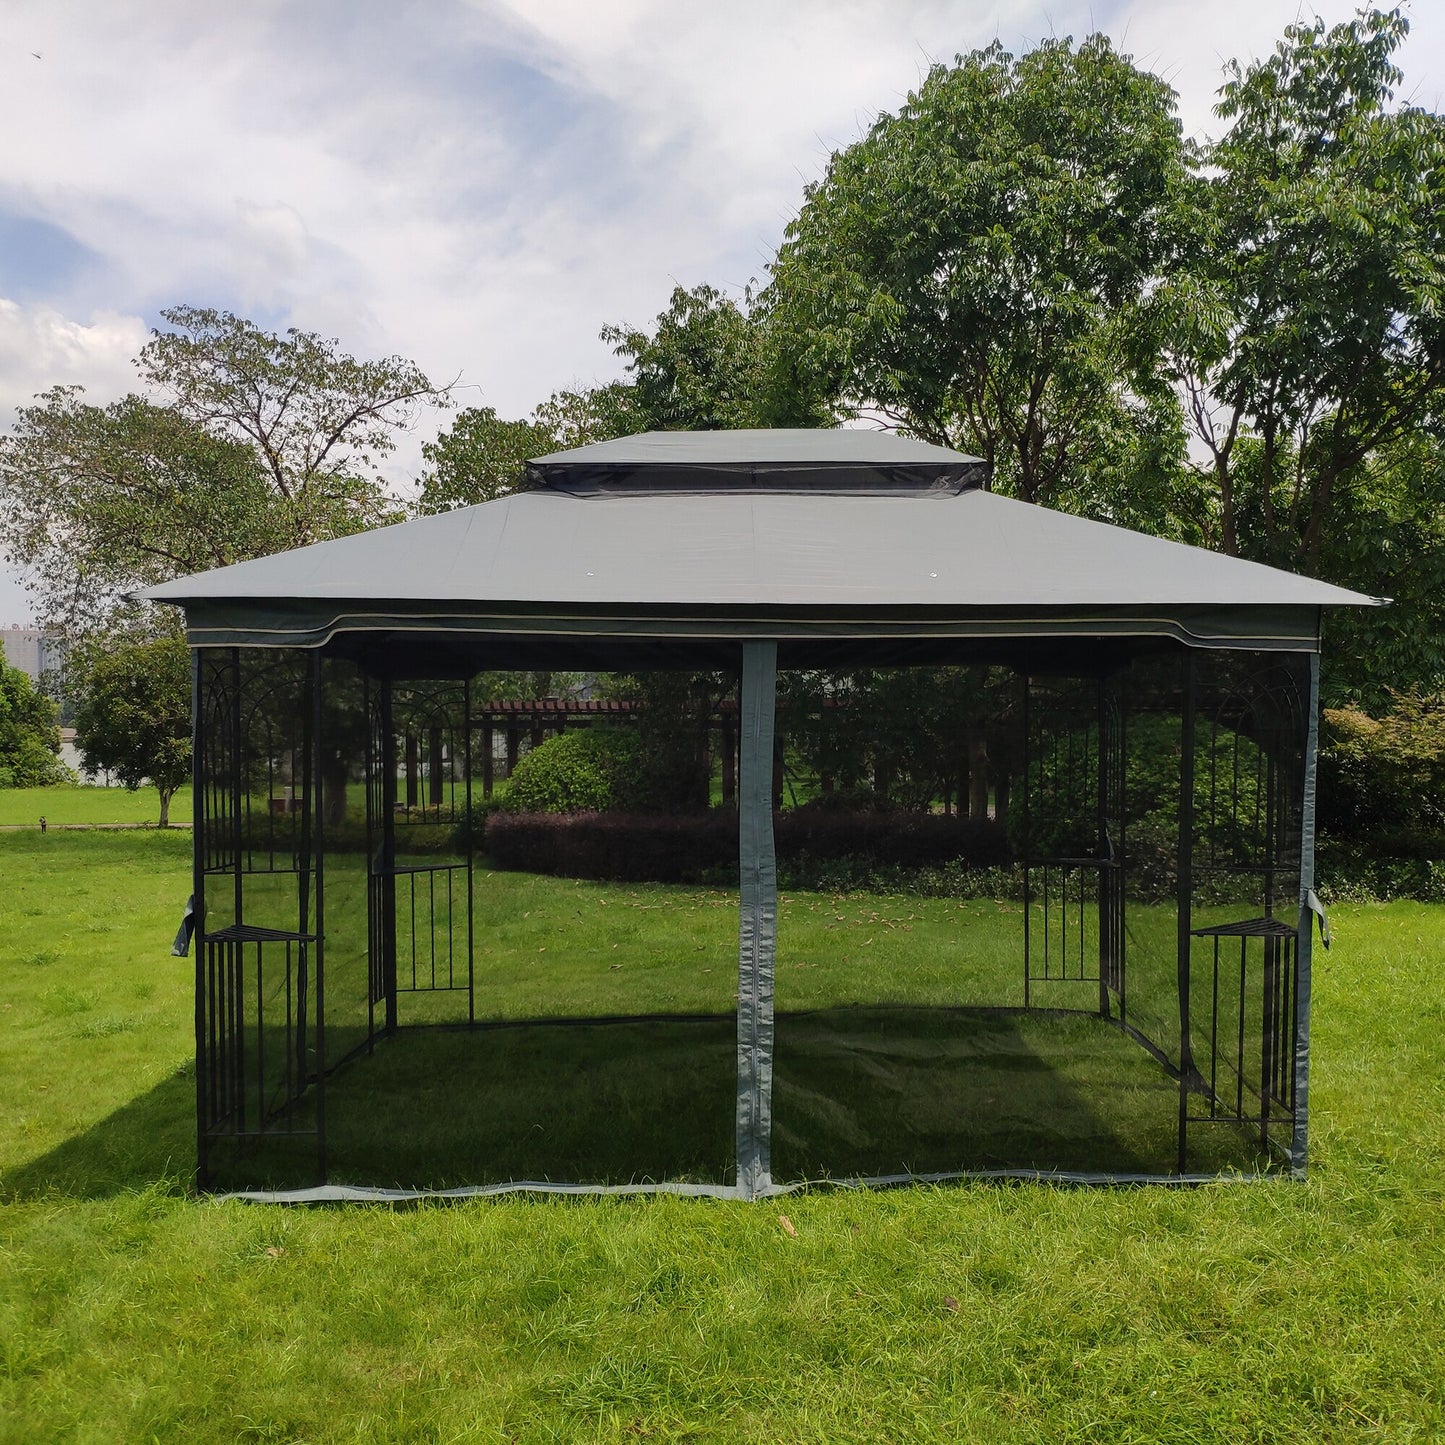 13x10 ft patio Pergola sun shade with ventilated double top and four side netting mosquito netting